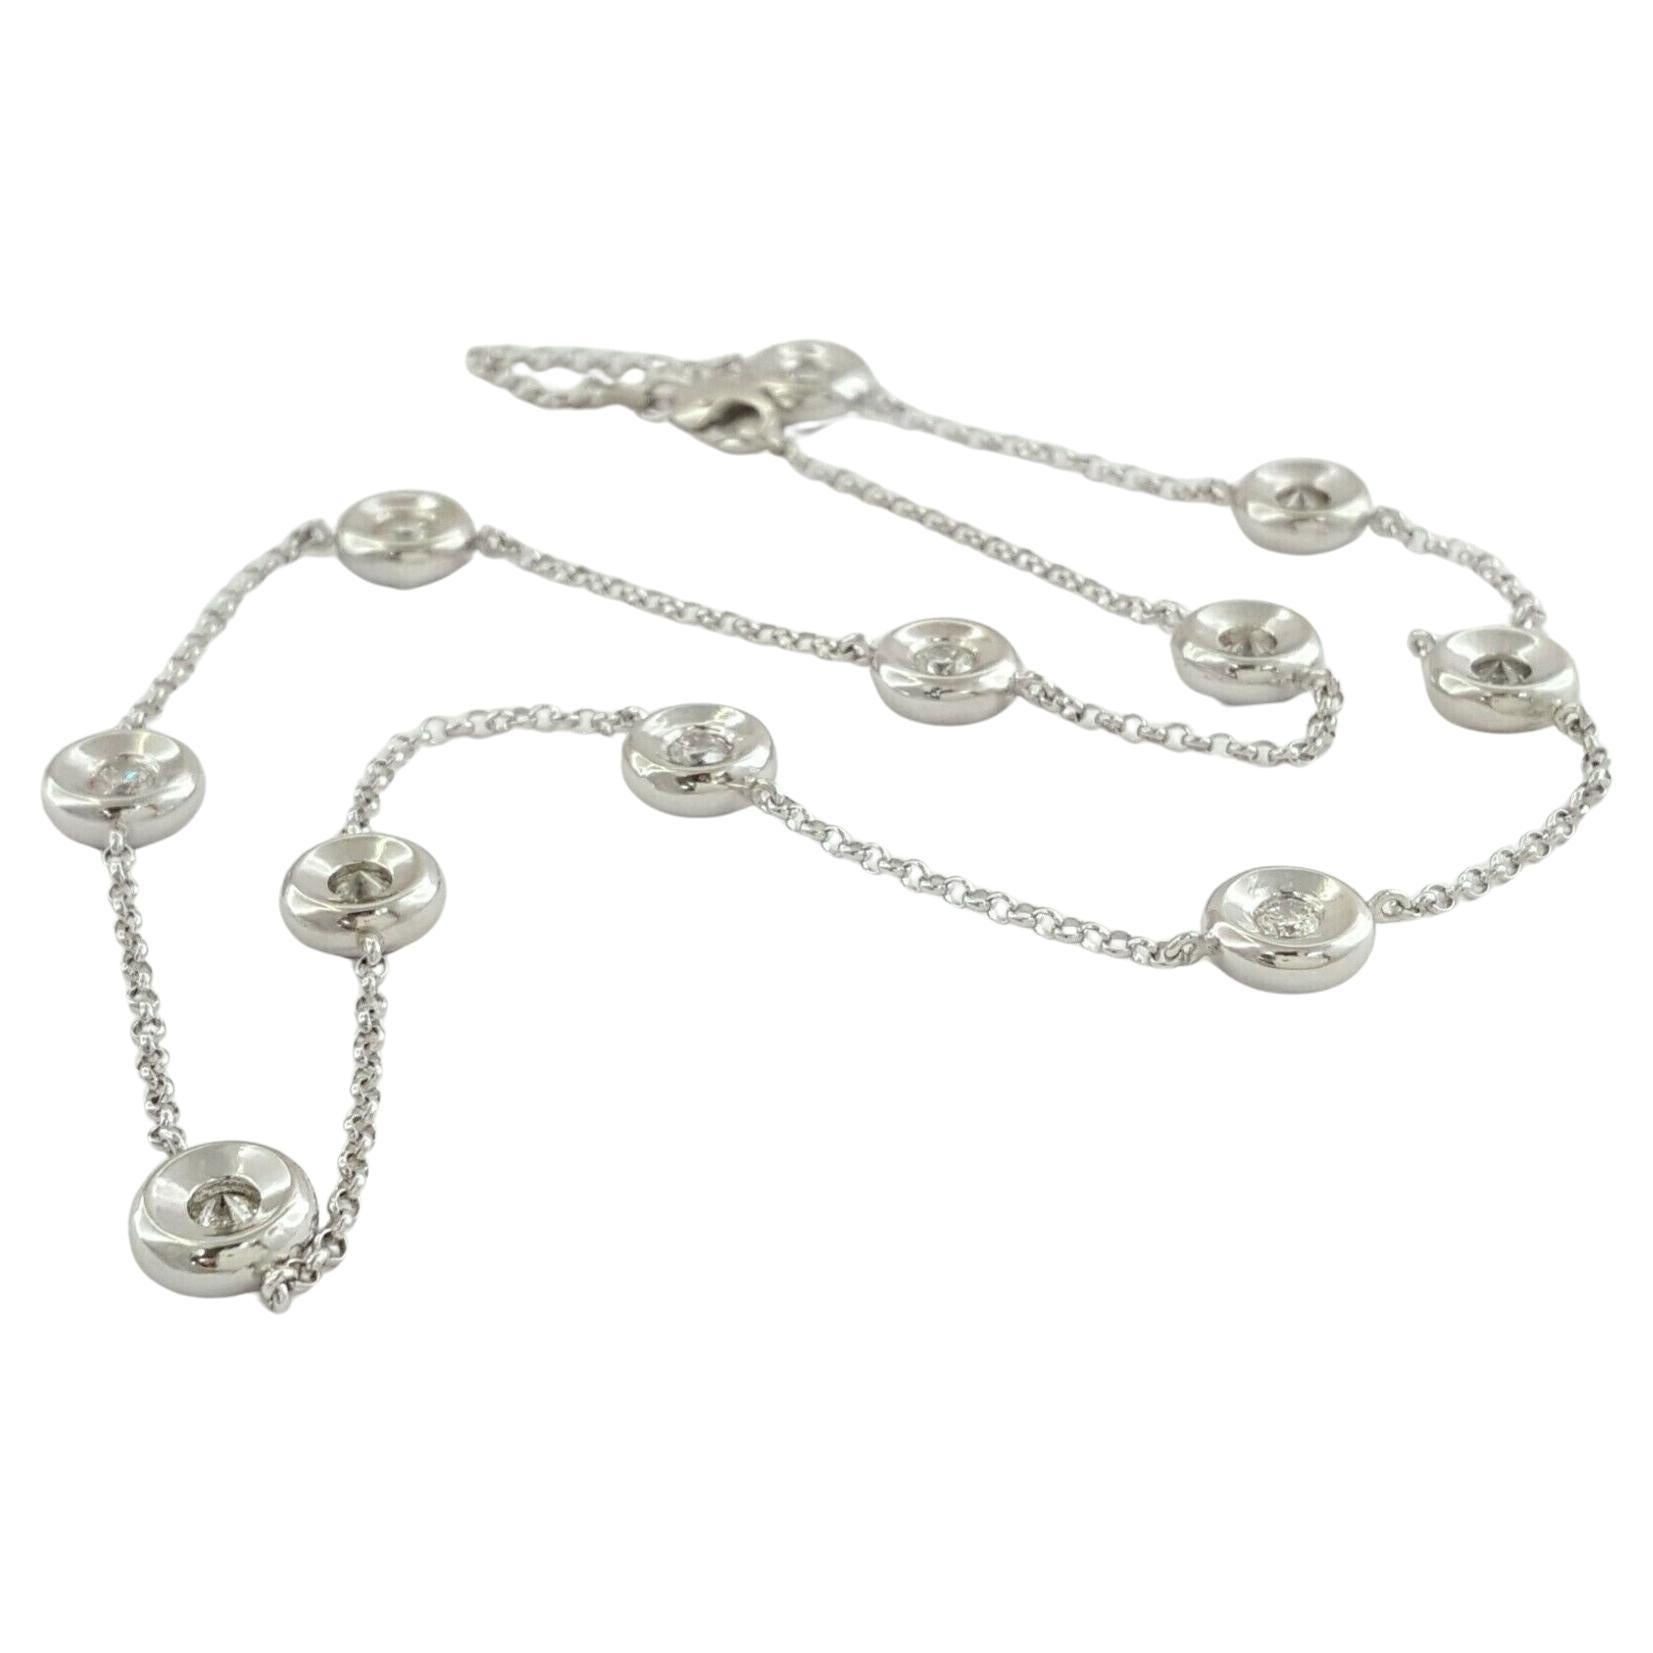  dazzling 1.4 carat Total Weight Round Brilliant Cut Diamond By The Yard Necklace in 14K White Gold. Weighing 13.8 grams, the chain boasts a length of 16 inches, with the option to add an extension if desired. The necklace features 11 Natural Round